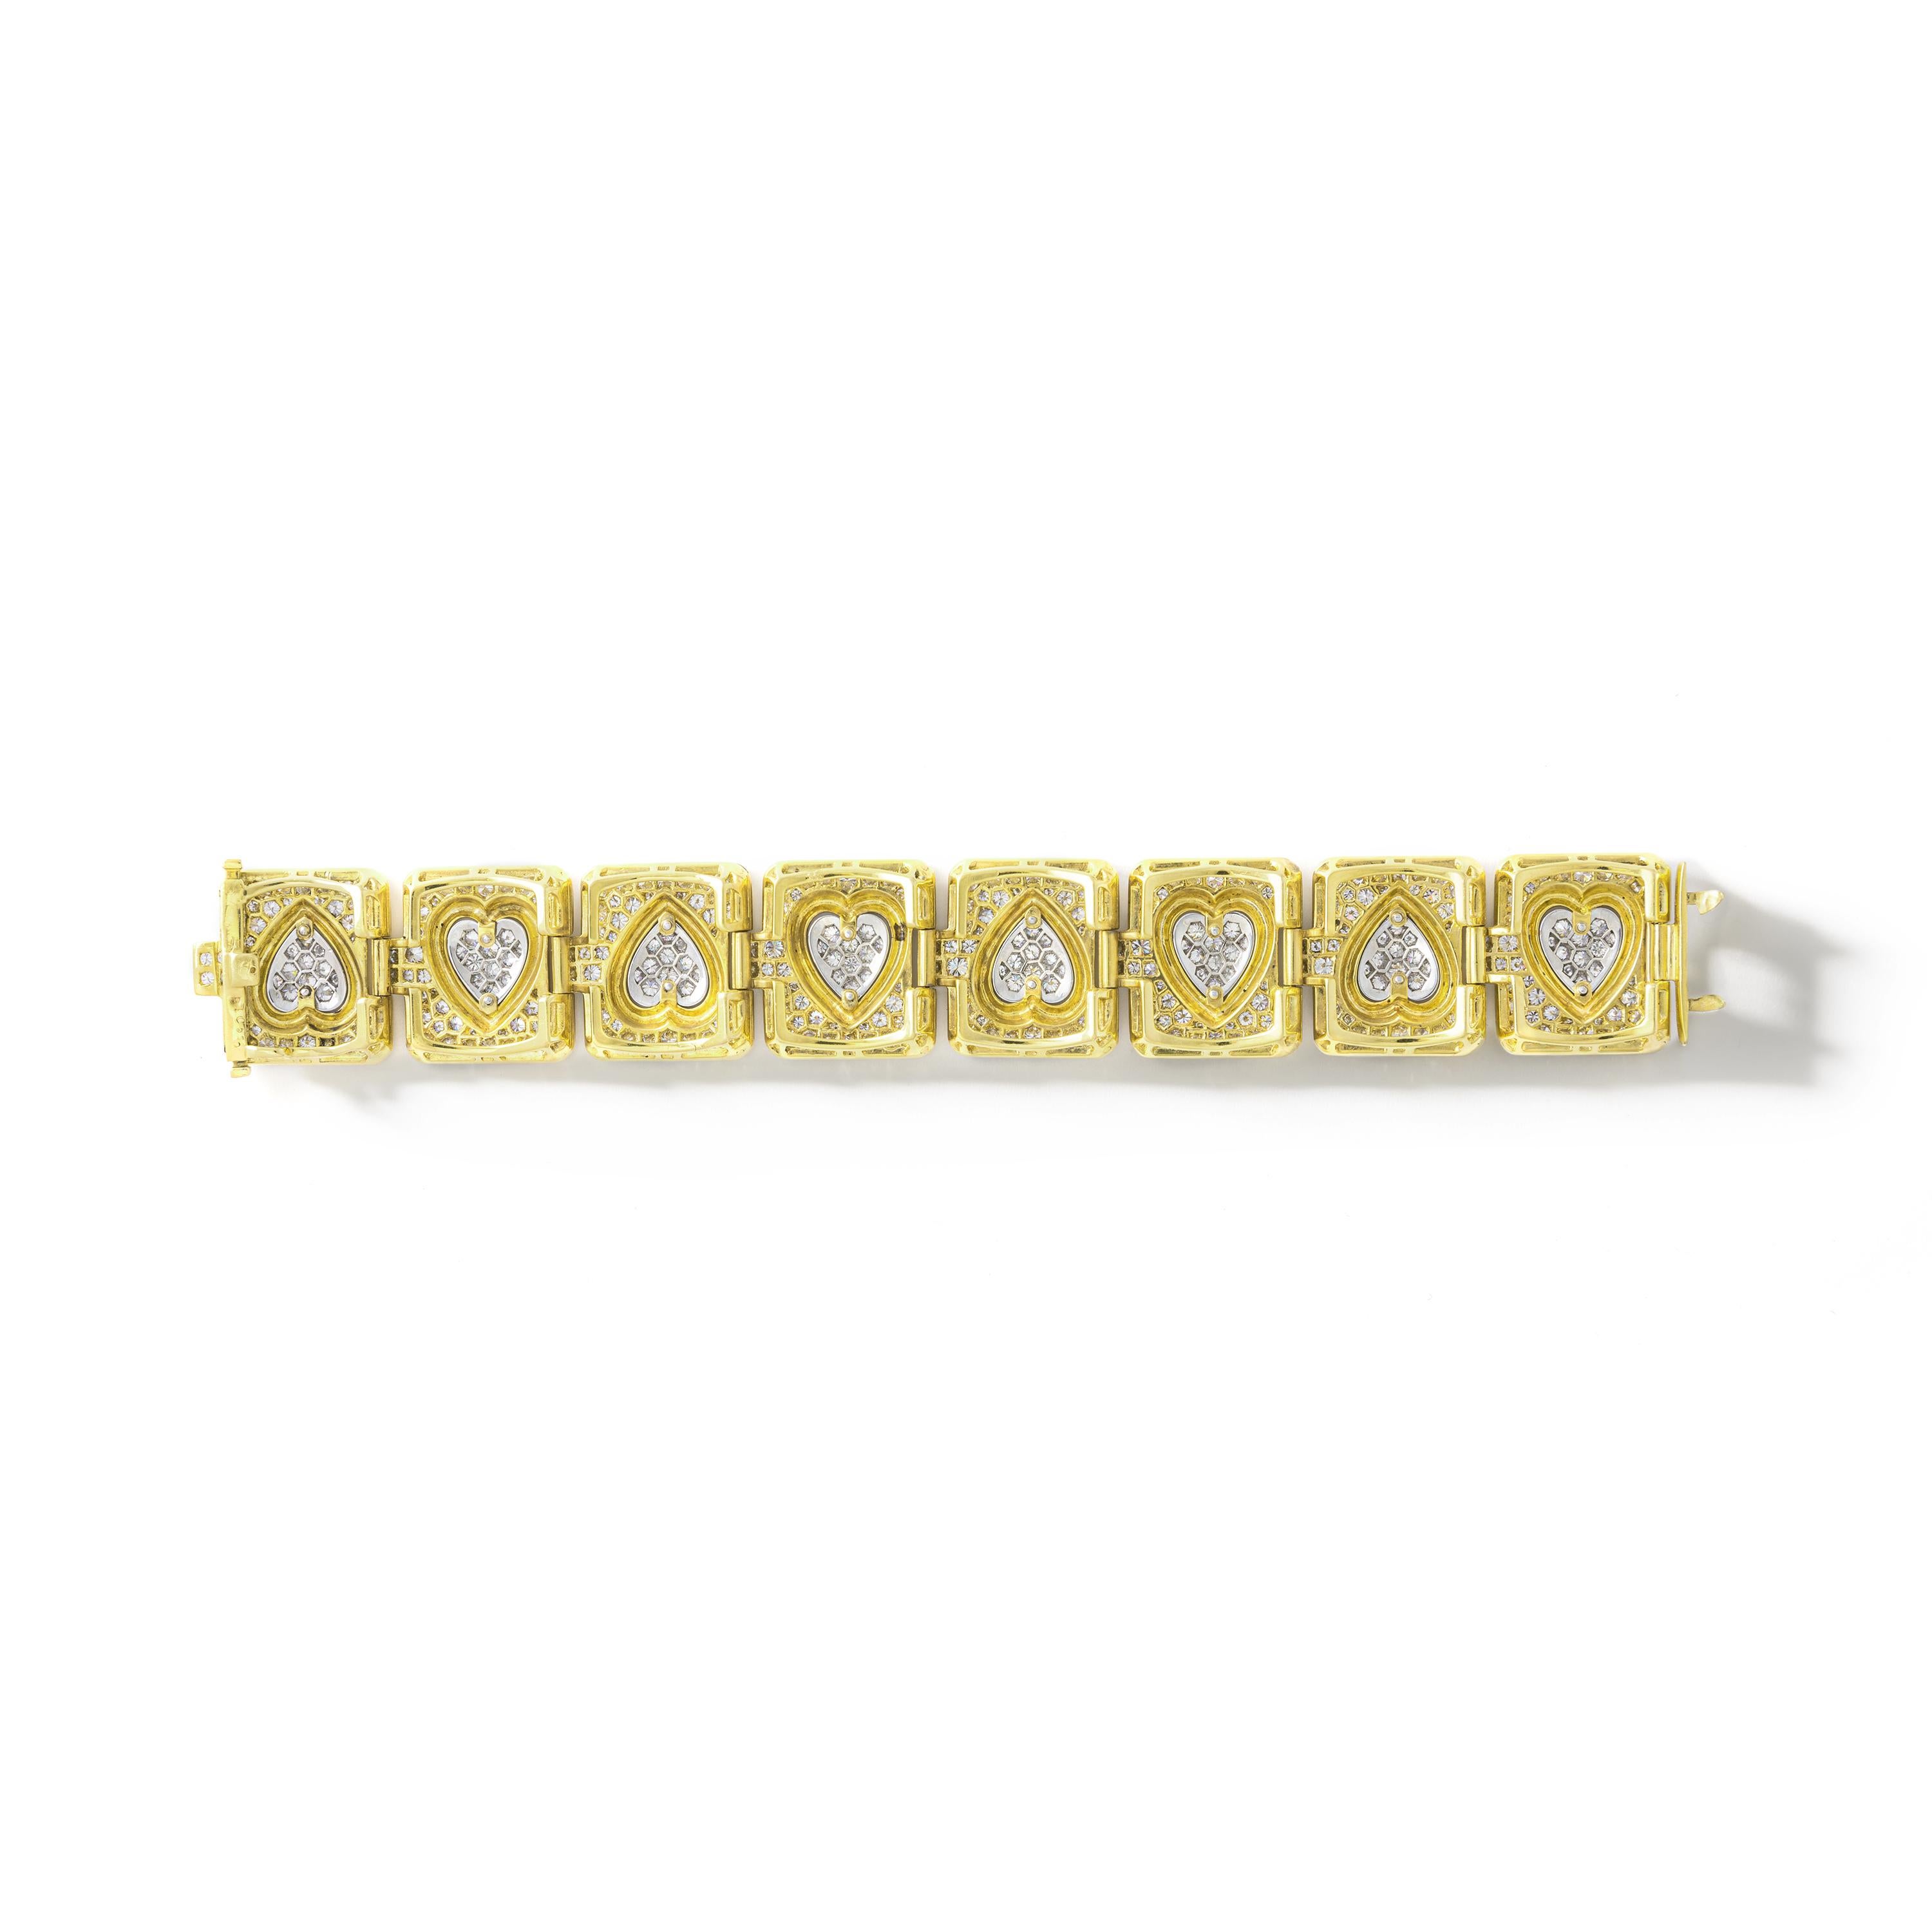 The combination White and Yellow is back. We love, love and love!
Heart shapes in platinum and diamond on a yellow gold bracelet.
French marks, circa 1980.

Total weight of the diamonds: approximately 23.00 carats.

Measures:
Length: 18 centimeters